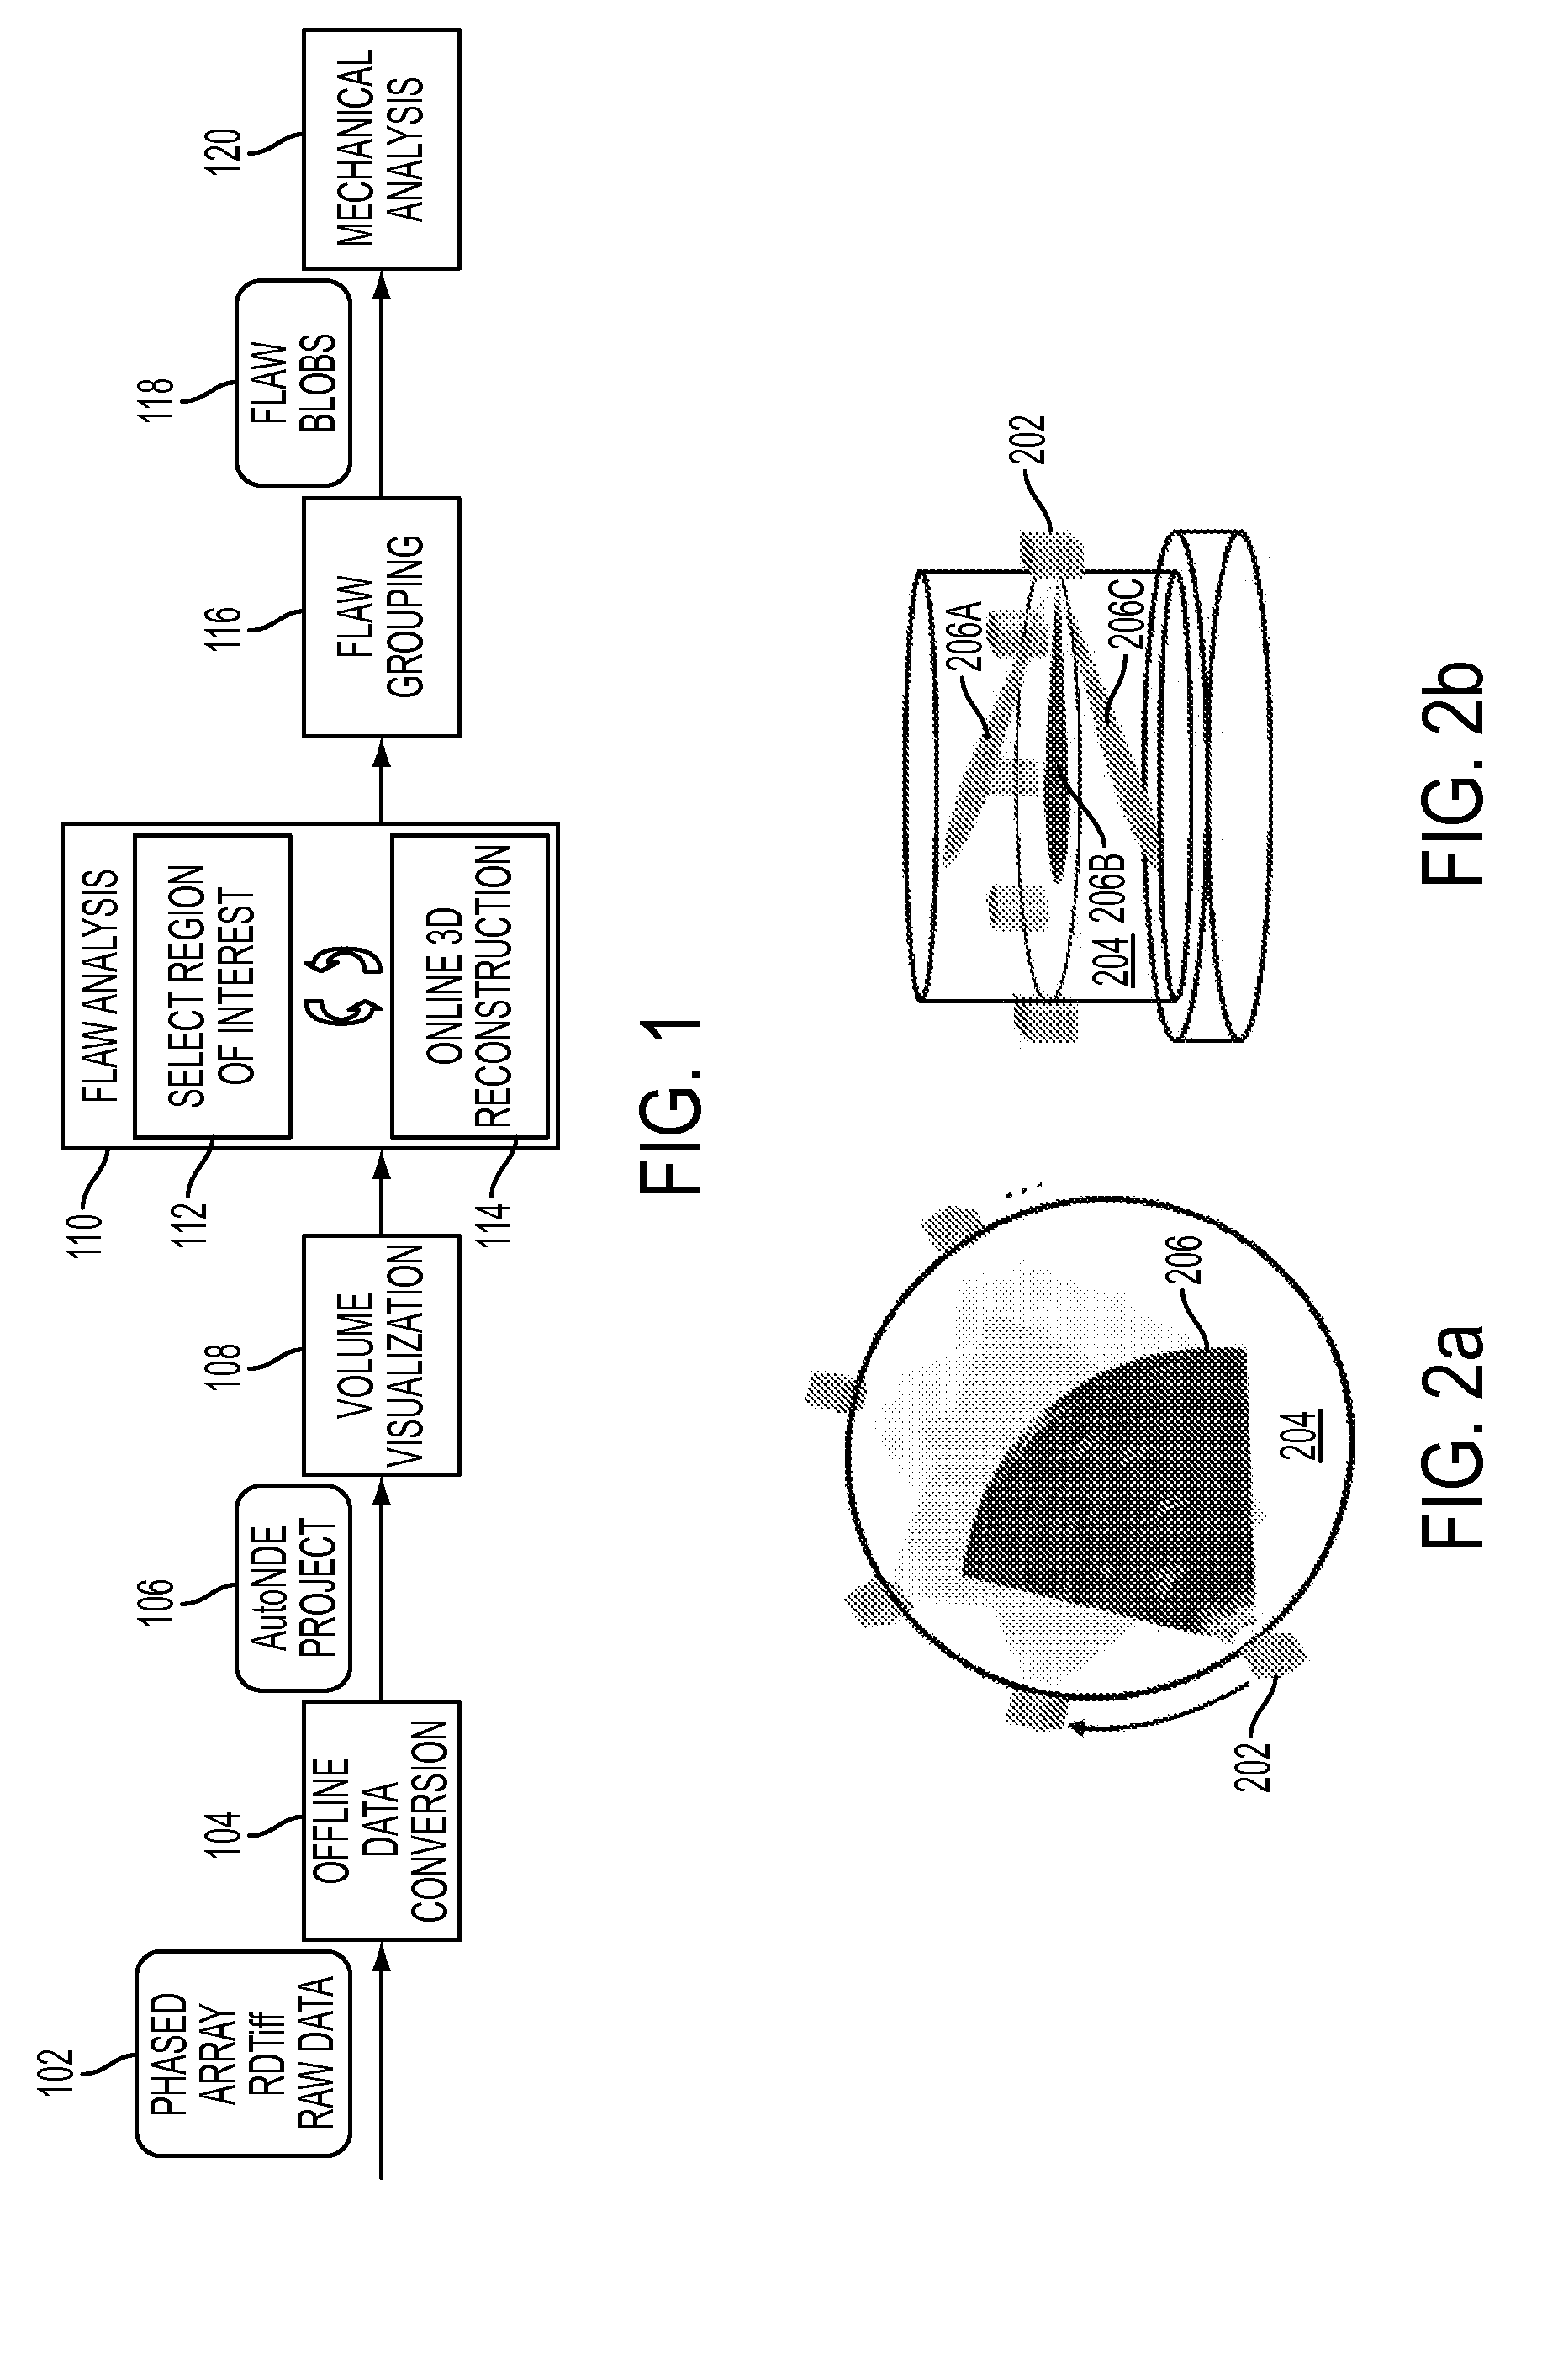 Method and Apparatus for Three-Dimensional Visualization and Analysis for Automatic Non-Destructive Examination of a Solid Rotor using Ultrasonic Phased Array